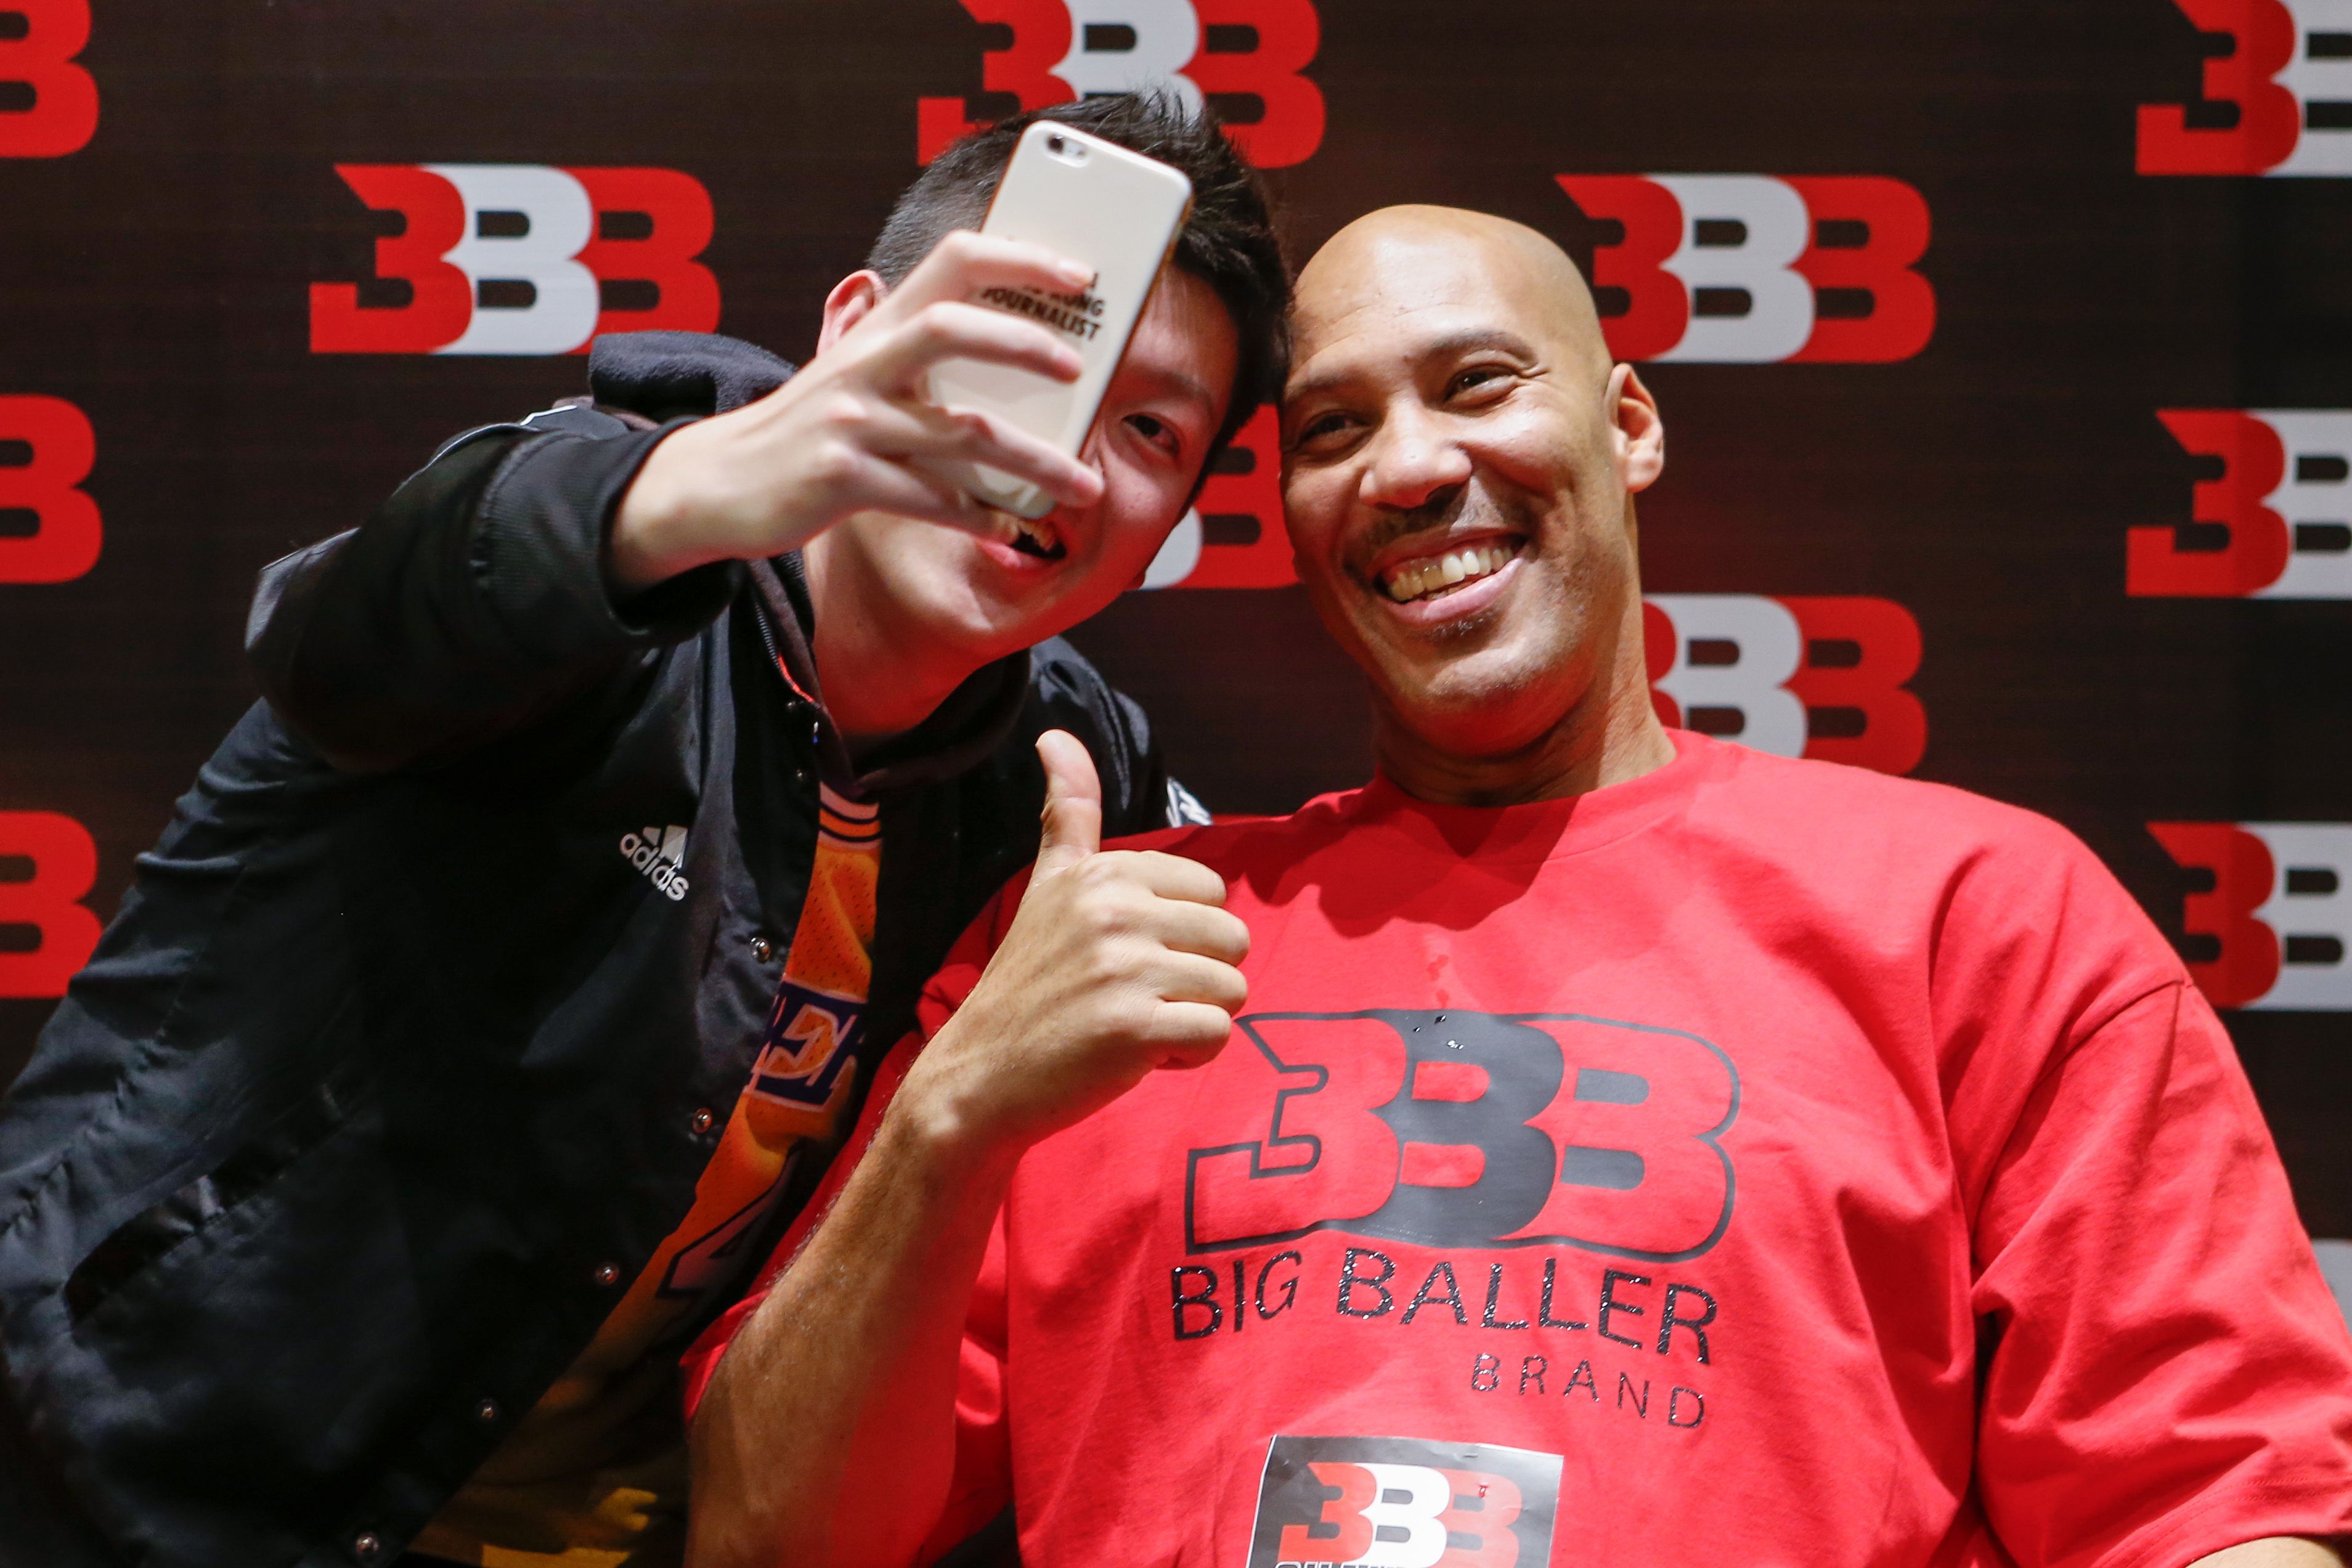 LaVar Ball (R), father of LiAngelo Ball and the owner of the Big Baller brand, poses for a selfie with a fan during a promotional event in Shanghai on November 10, 2017. LiAngelo Ball, the younger brother of Los Angeles Lakers star Lonzo Ball, was among three college basketball players arrested in China on suspicion of shoplifting, US media reports said on November 8. (STR&mdash;AFP/Getty Images)